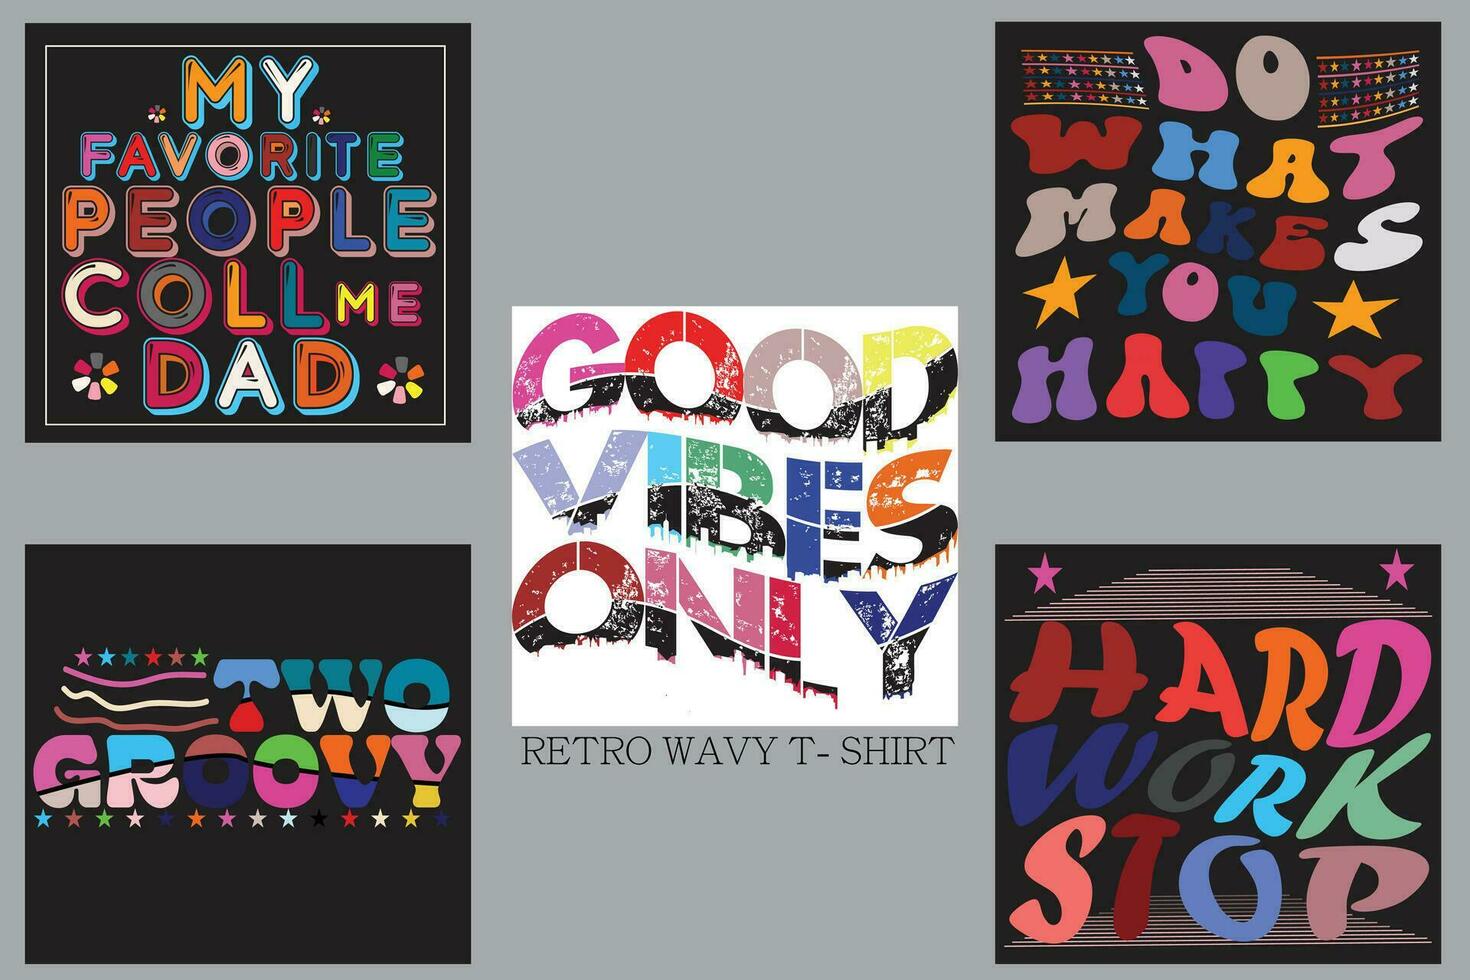 MY FAVORITE PEOPLE COLL MY DAD  DO WHAY MAKES YOU HAPPY GOOD VIBES ONLY TWO GROOVY HARD WORK STOP Retro Wavy T-shirt Design vector